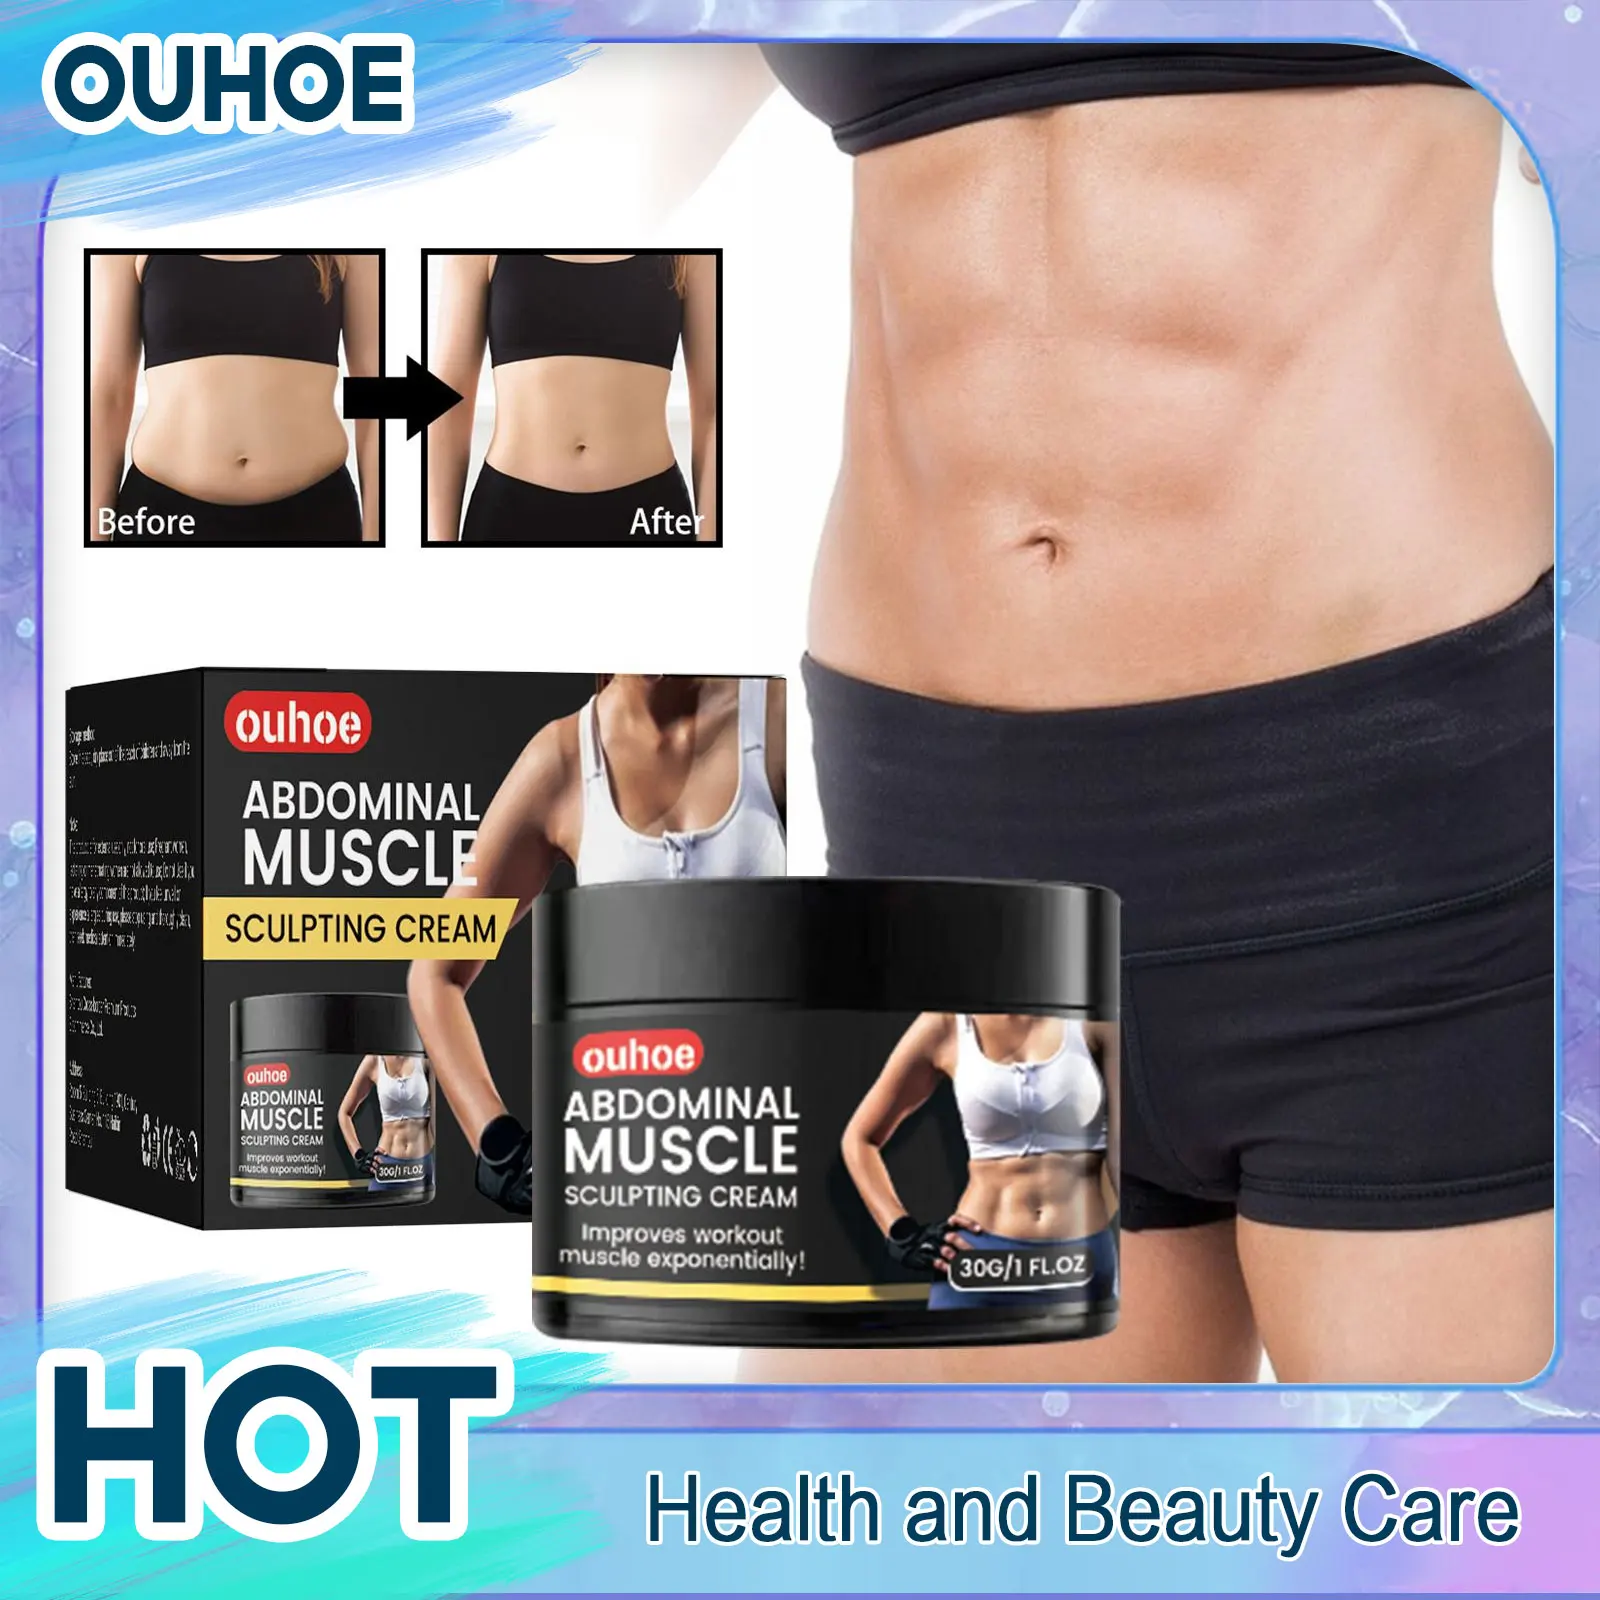 Belly Fat Burner Cream Weight Loss Firming Shaping Waist Lines Fitness Abdominal Muscle Flat Tummy Anti Cellulite Slimming Cream newborn umbilical cord care navel guard waist belt belly band tummy protectors